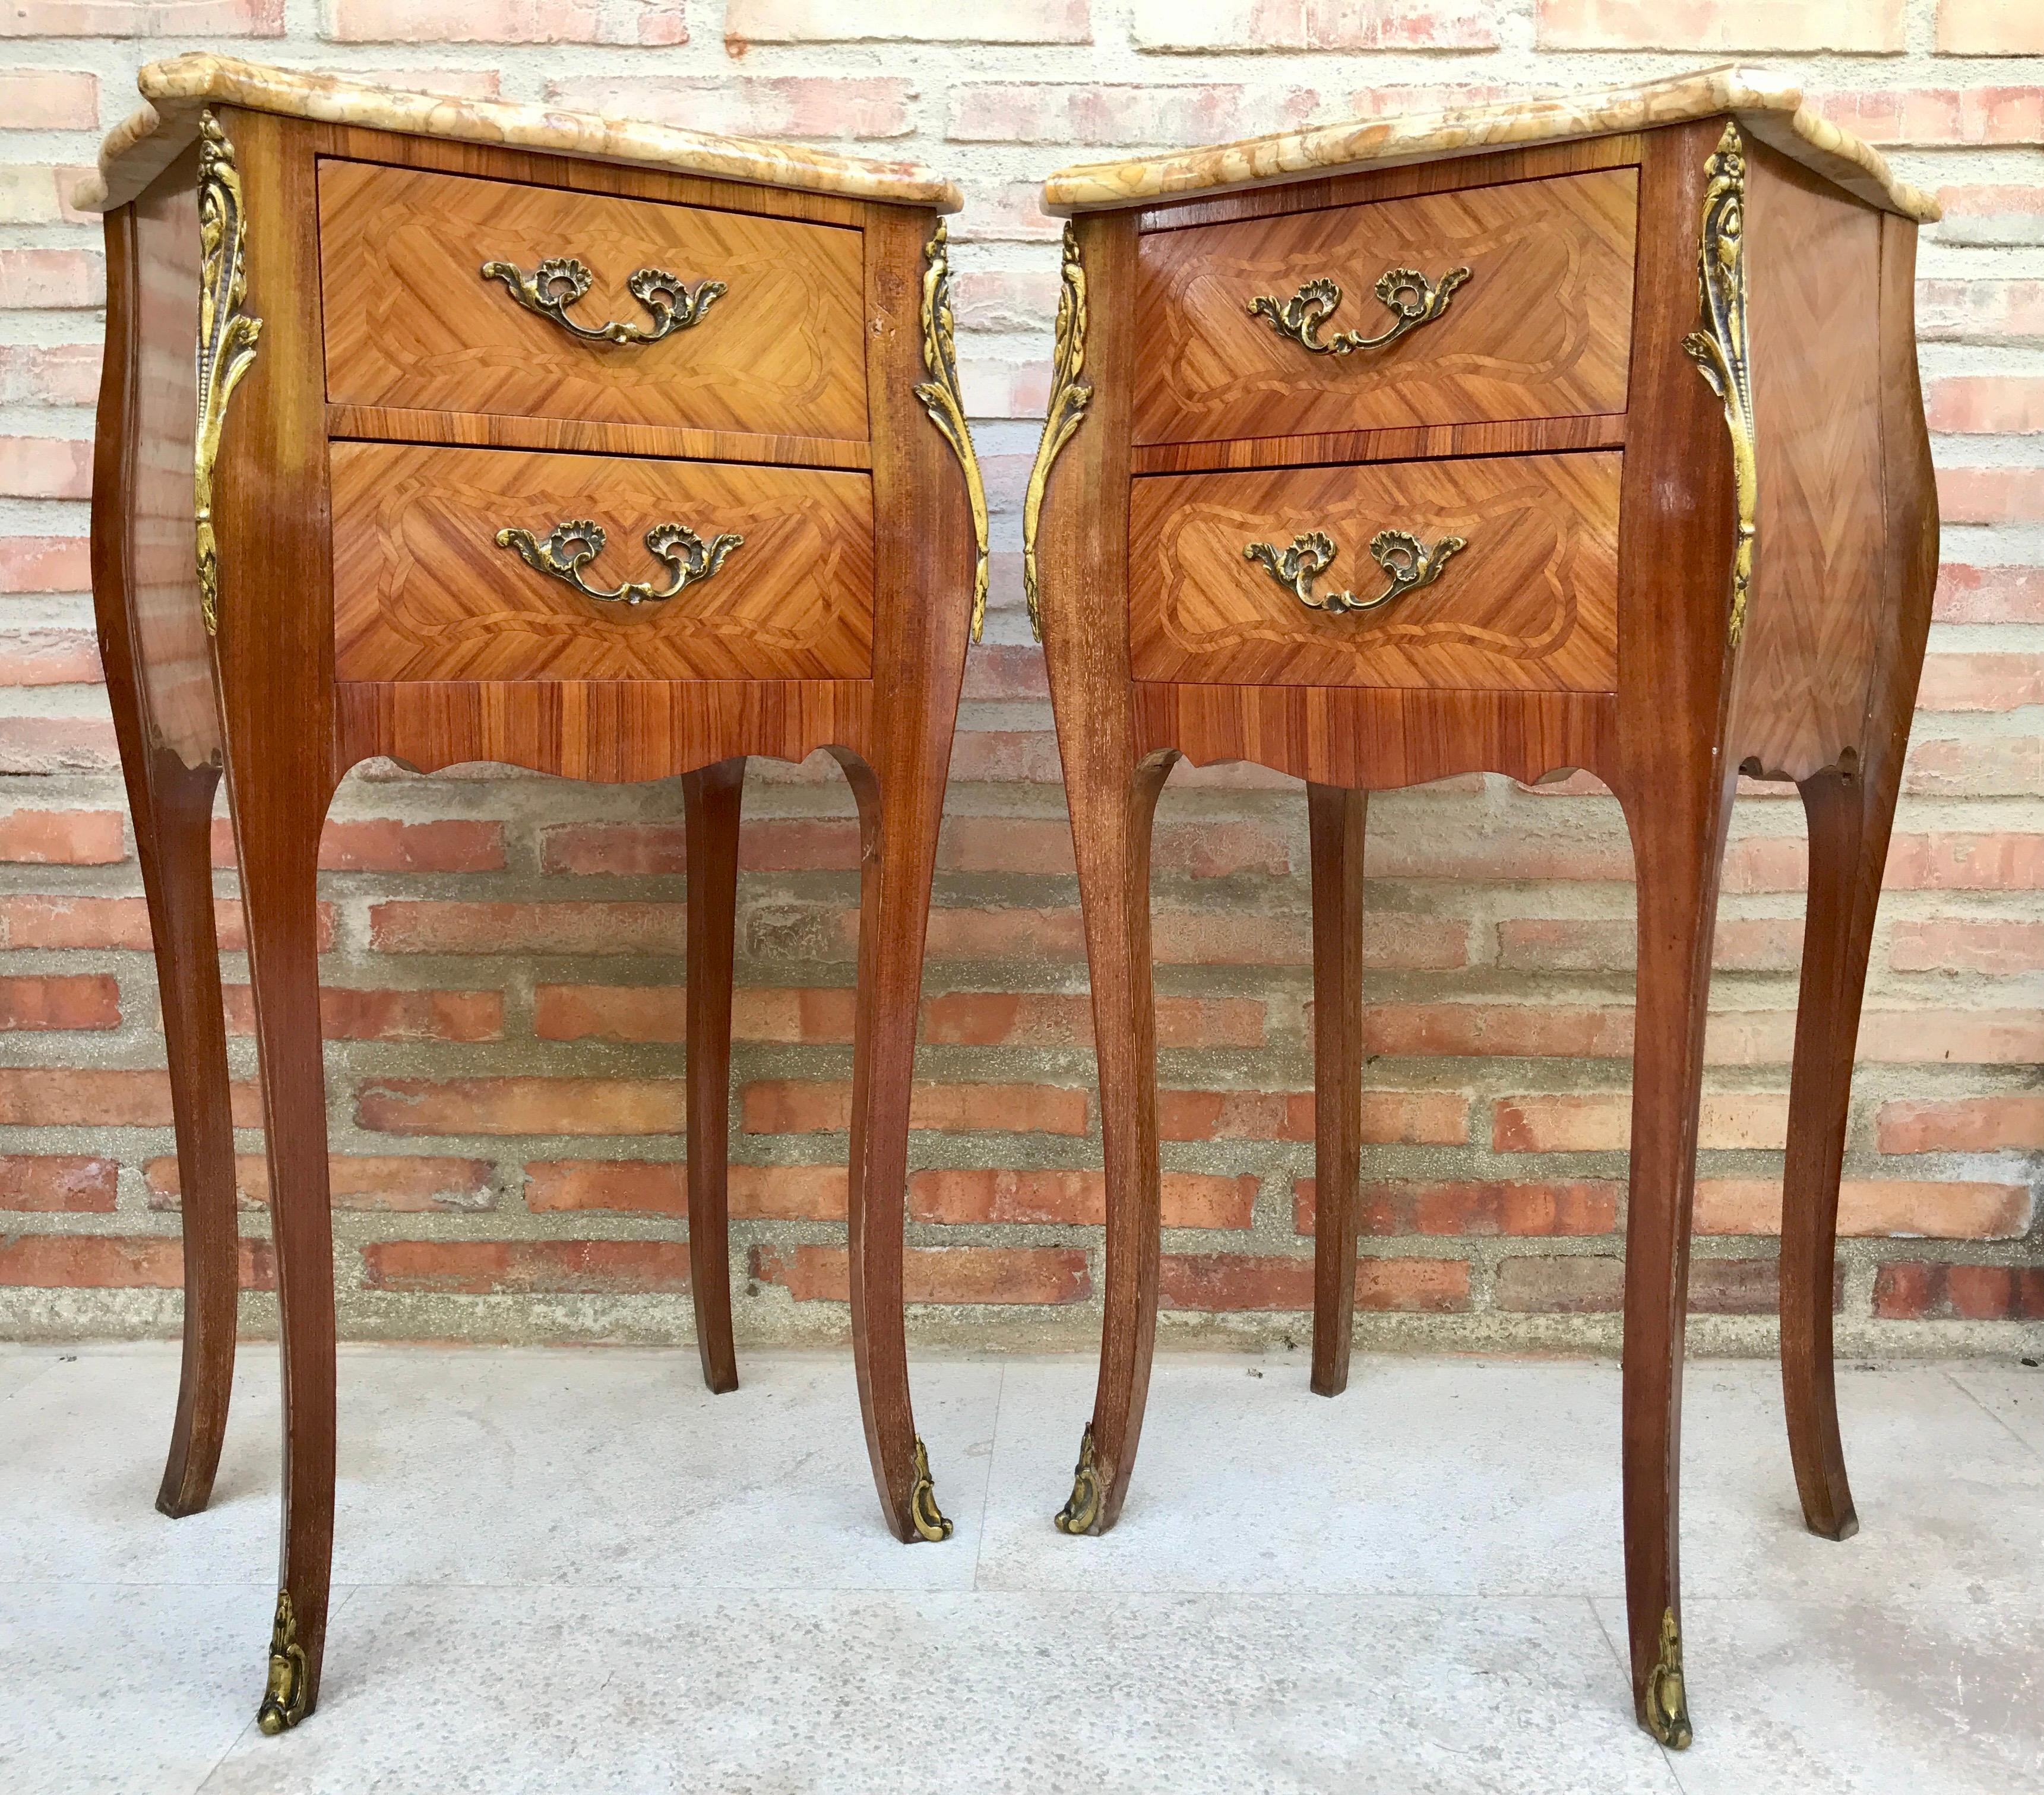 A pair of Antique French Louis XV Marquetry marble top nightstands. Subtle contours and scroll shapes are evident in the corner posts and legs, which support serpentine sides and an arched front façade for a curvaceous effect. The tops are luxurious